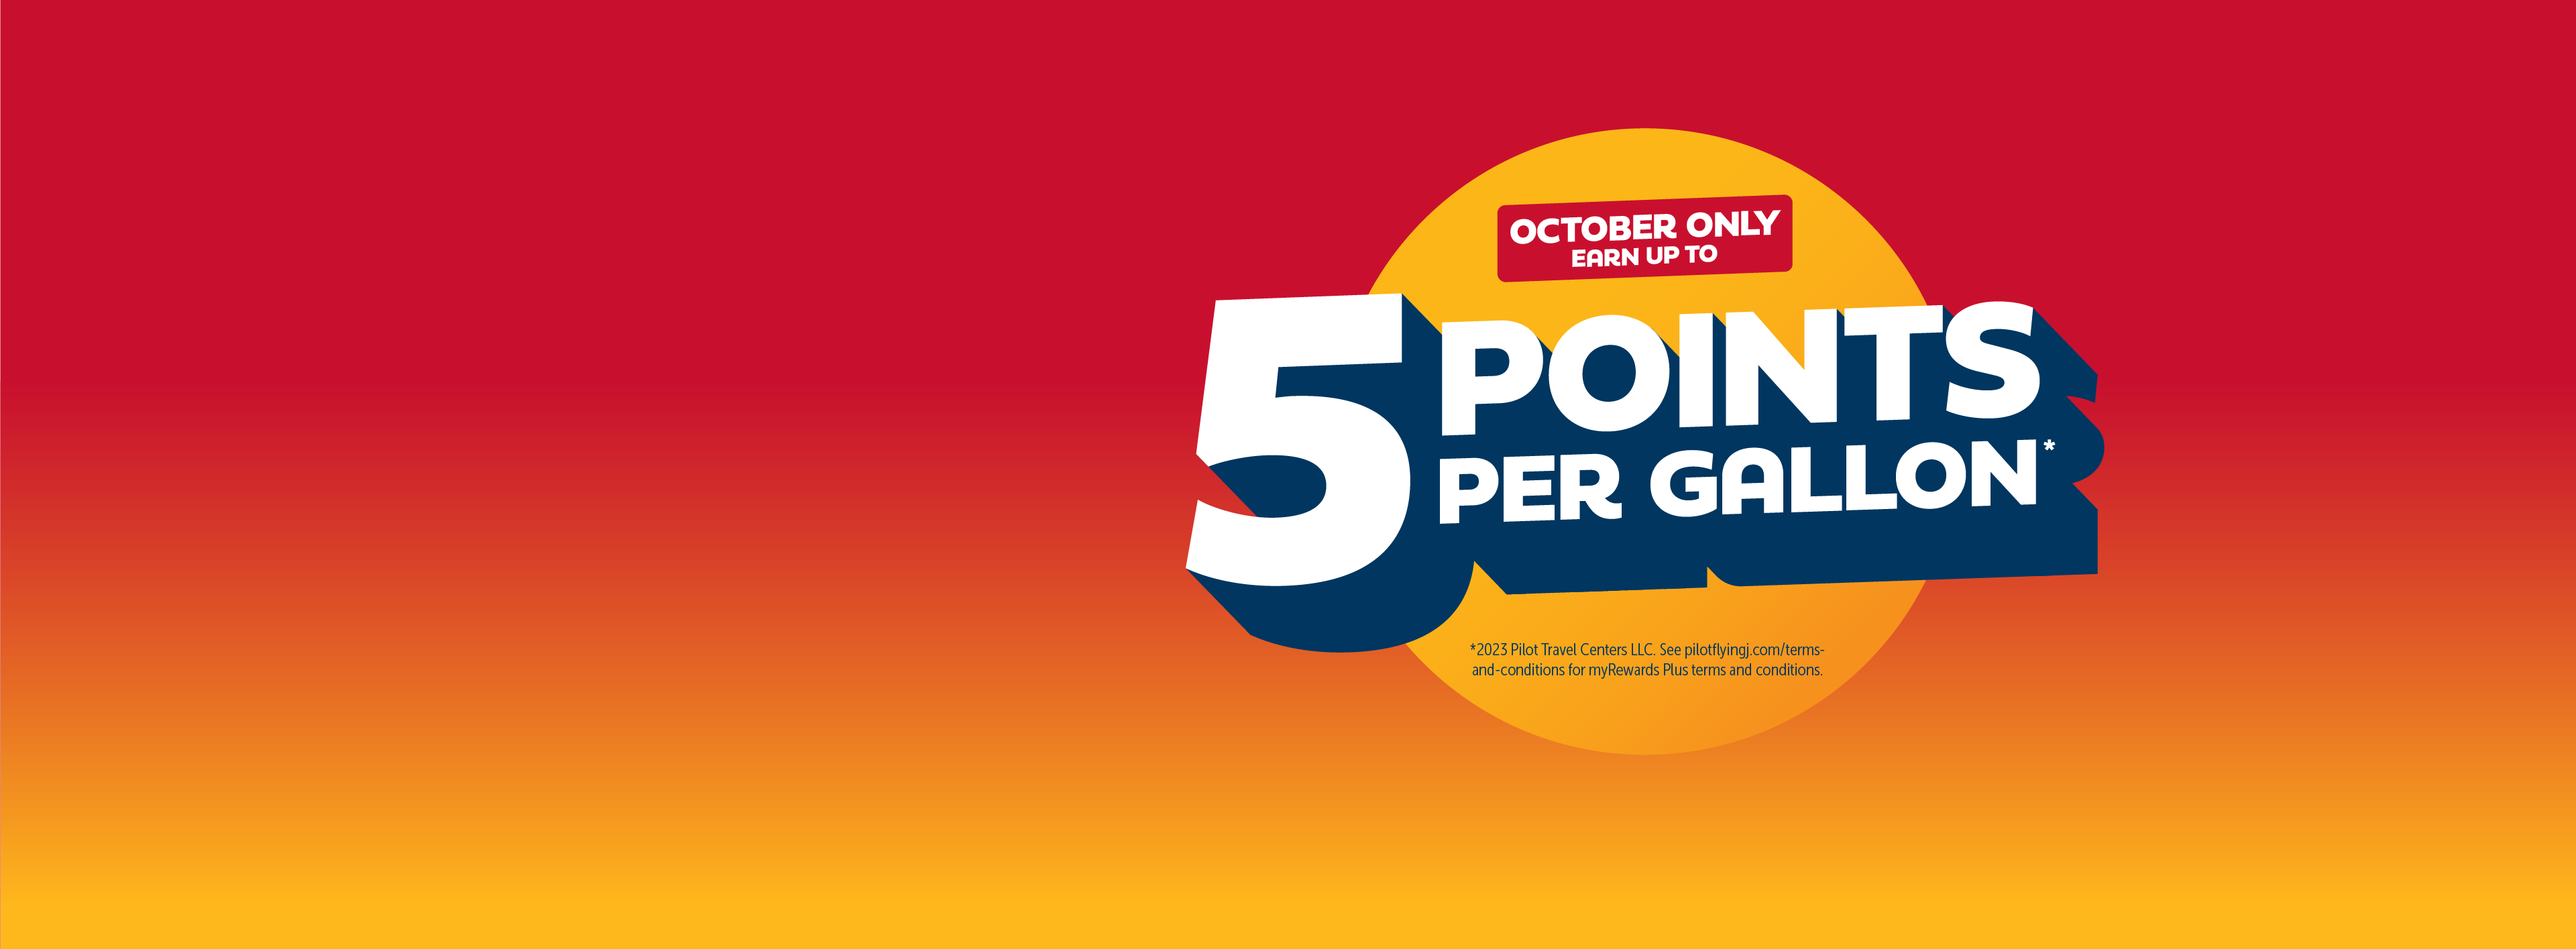 Earn 5 points per gallon all October long graphic